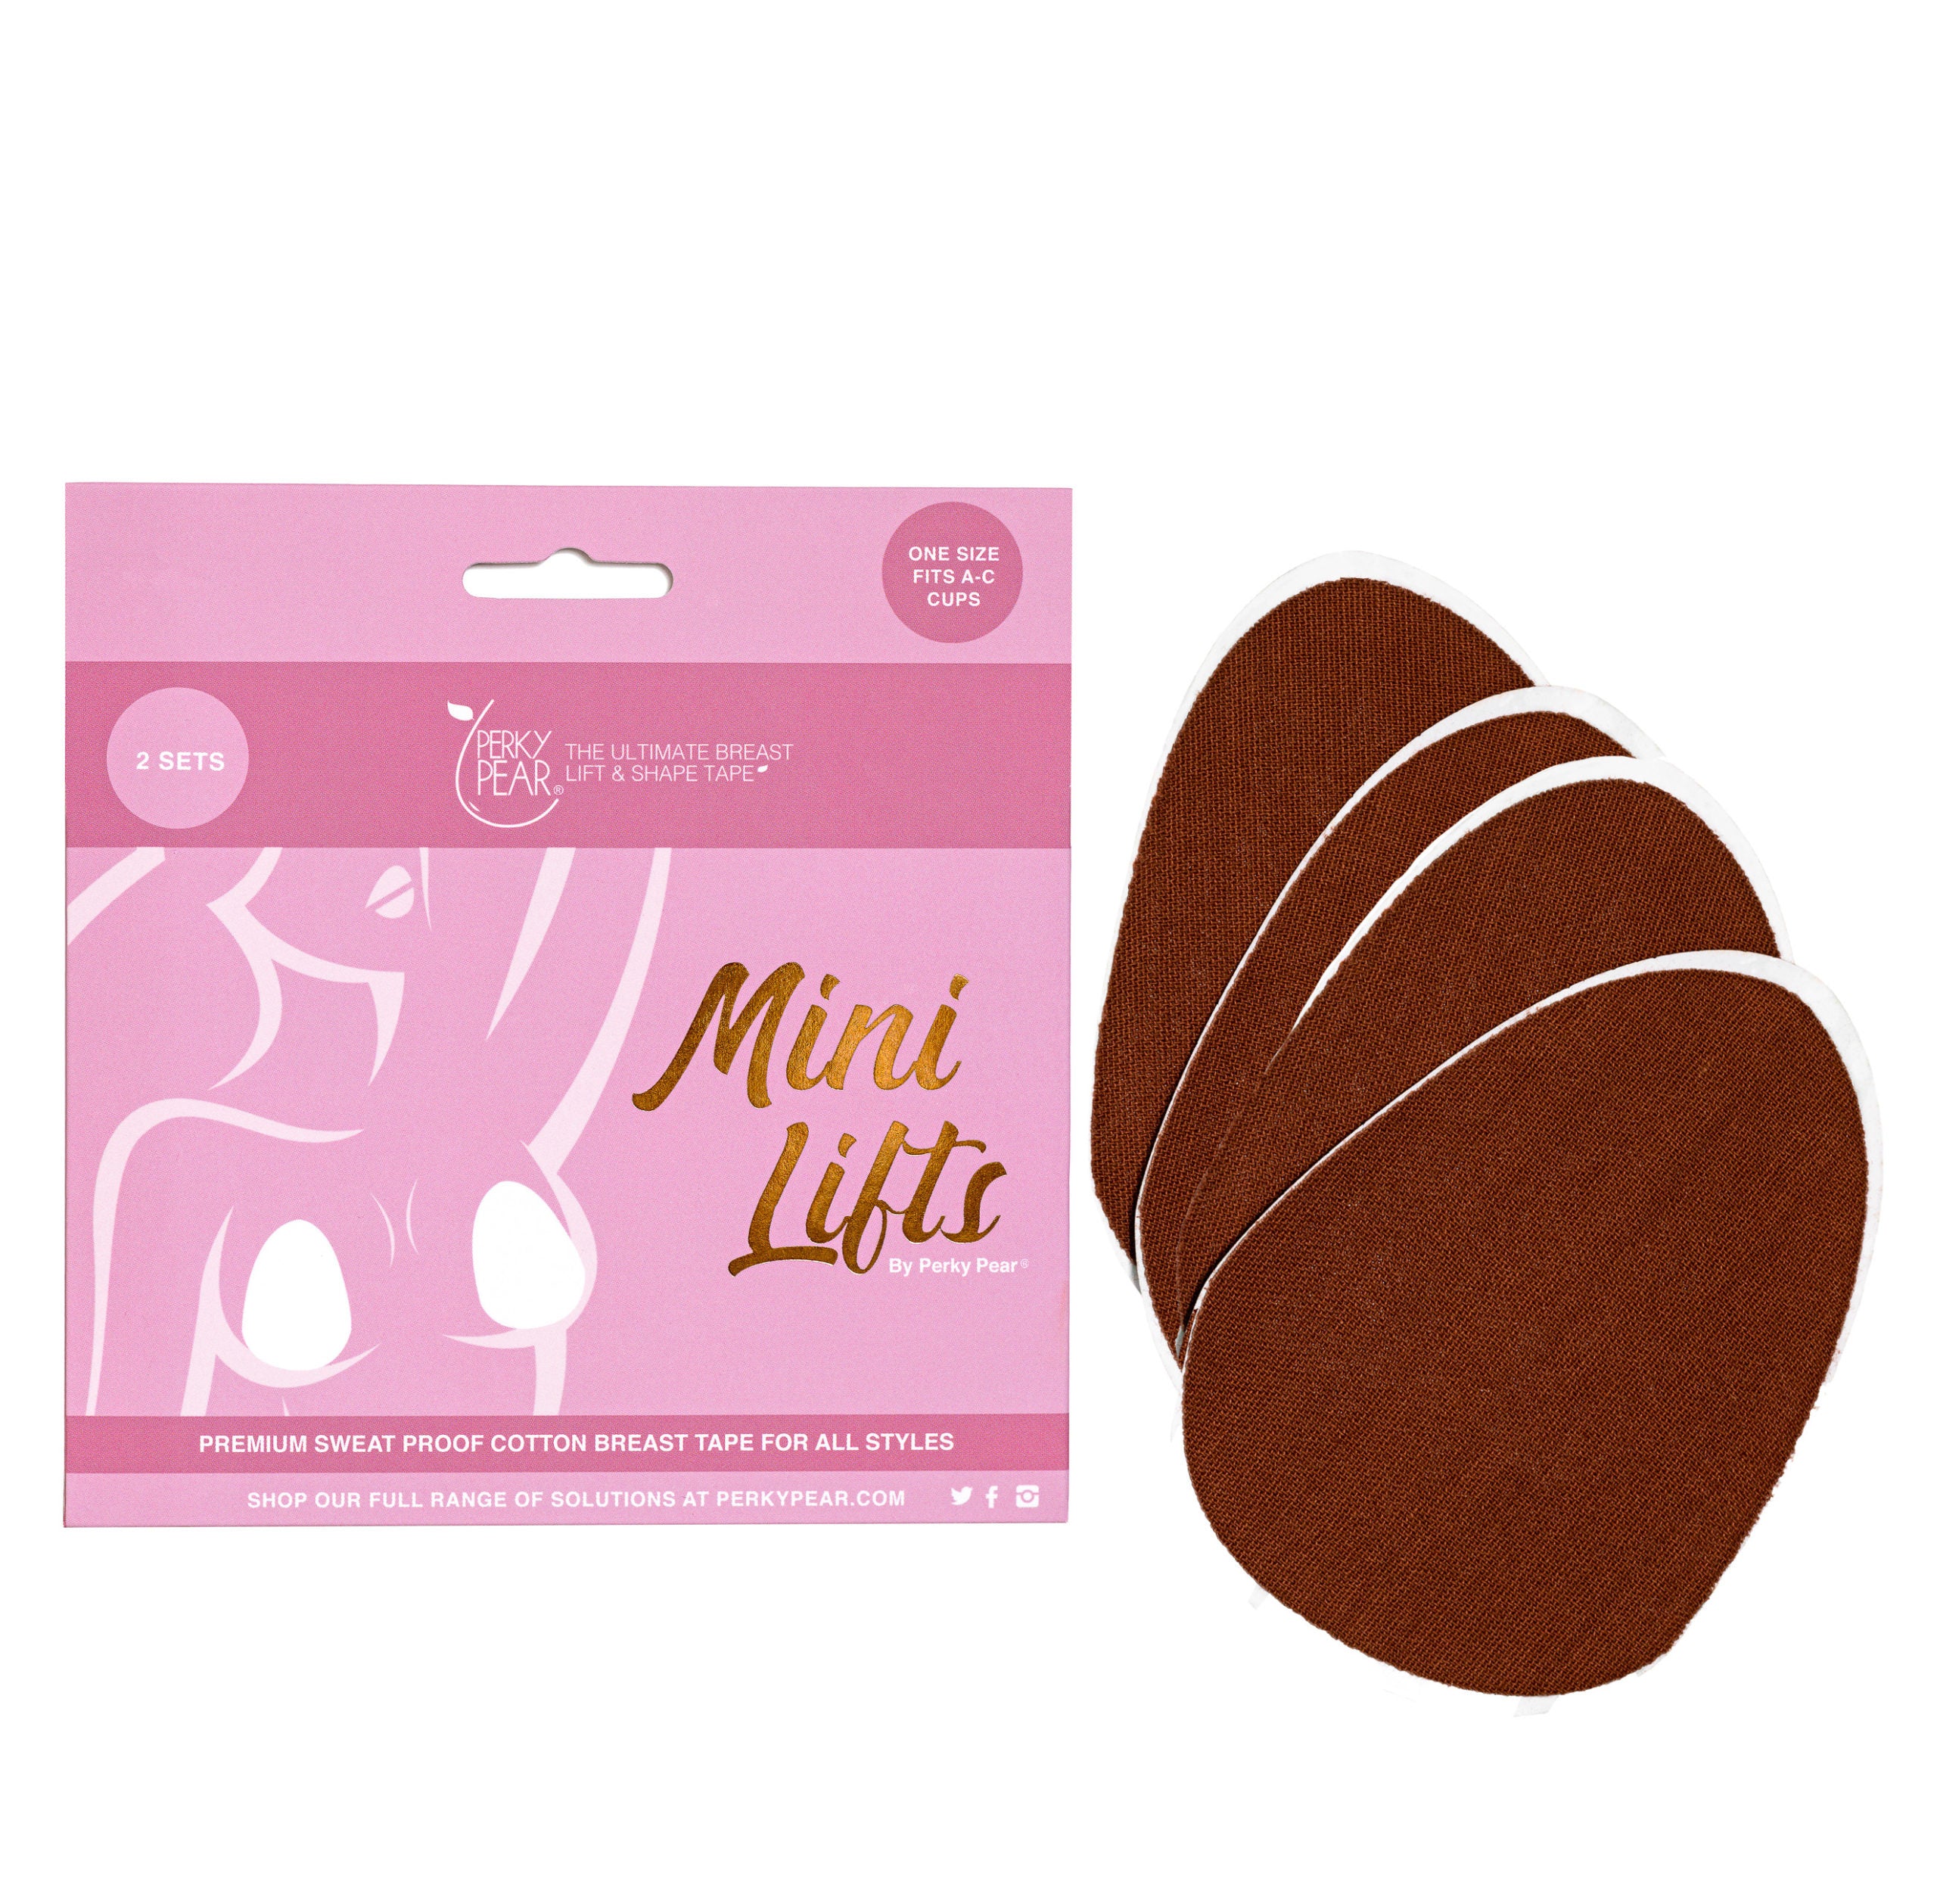 Lift Up Pads By Perky Pear®